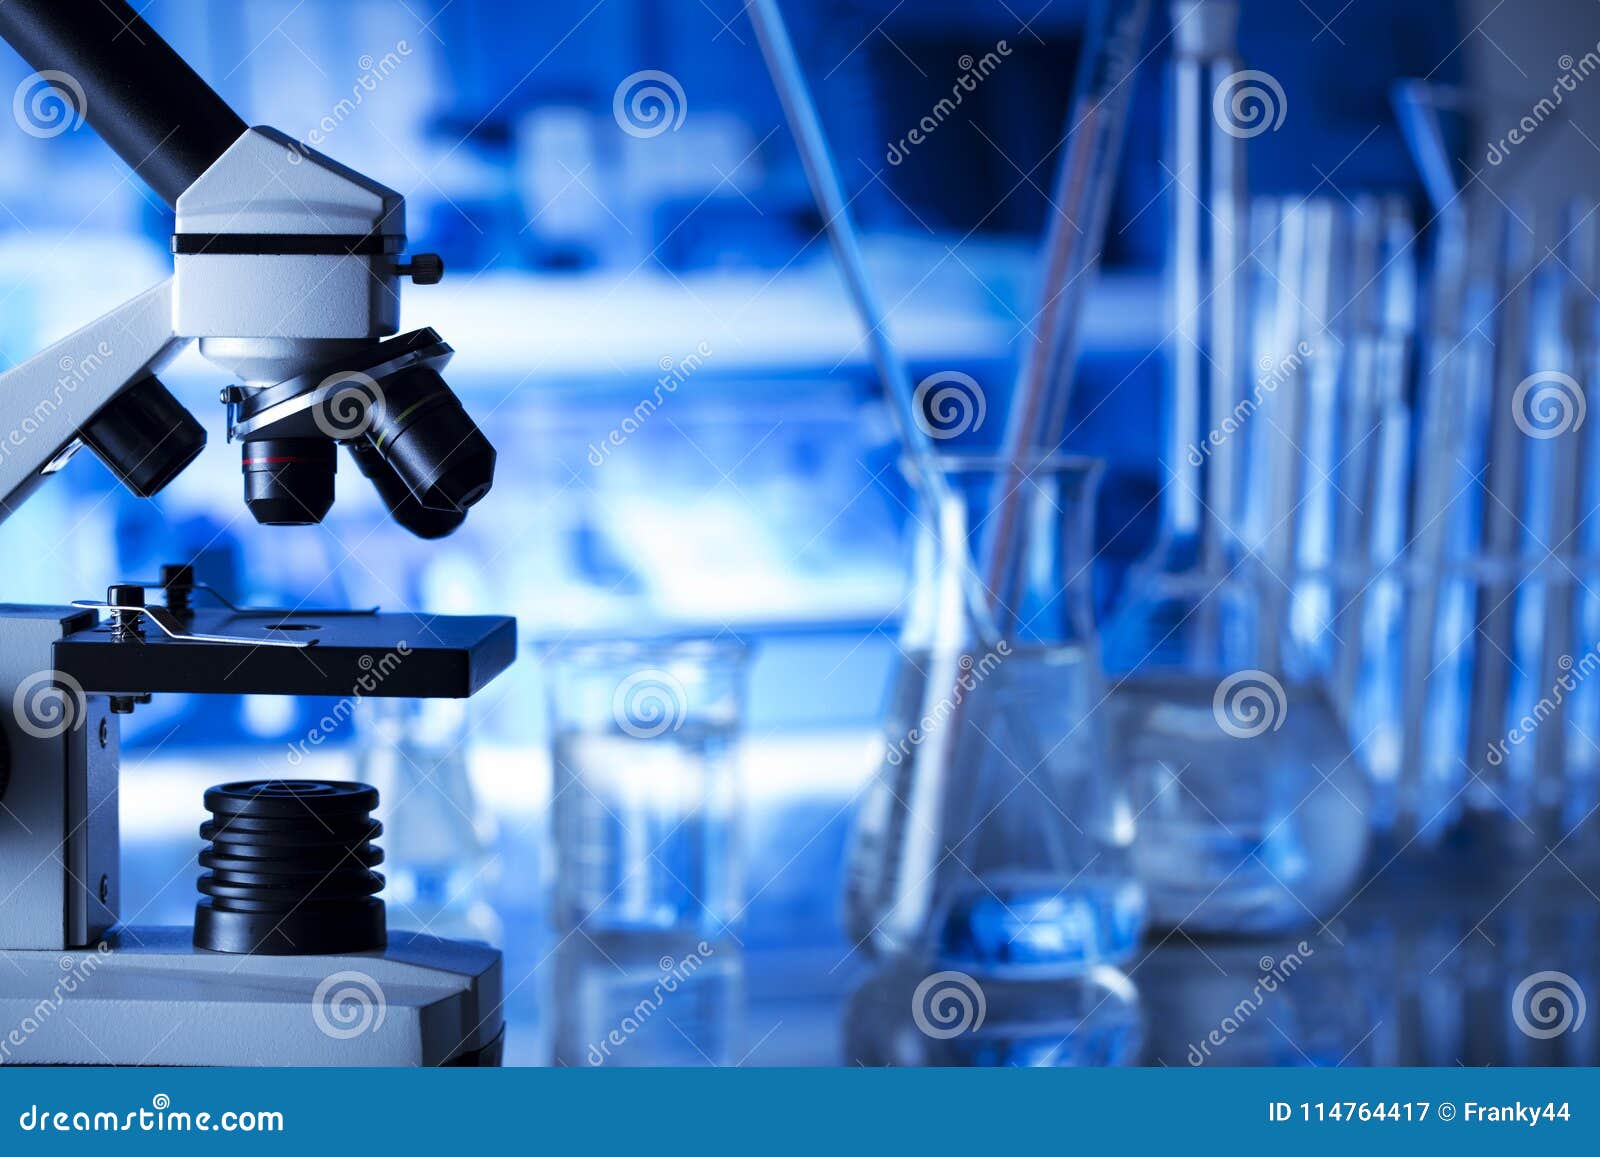 Science Concept. Place for Typography. Stock Image - Image of chemical ...